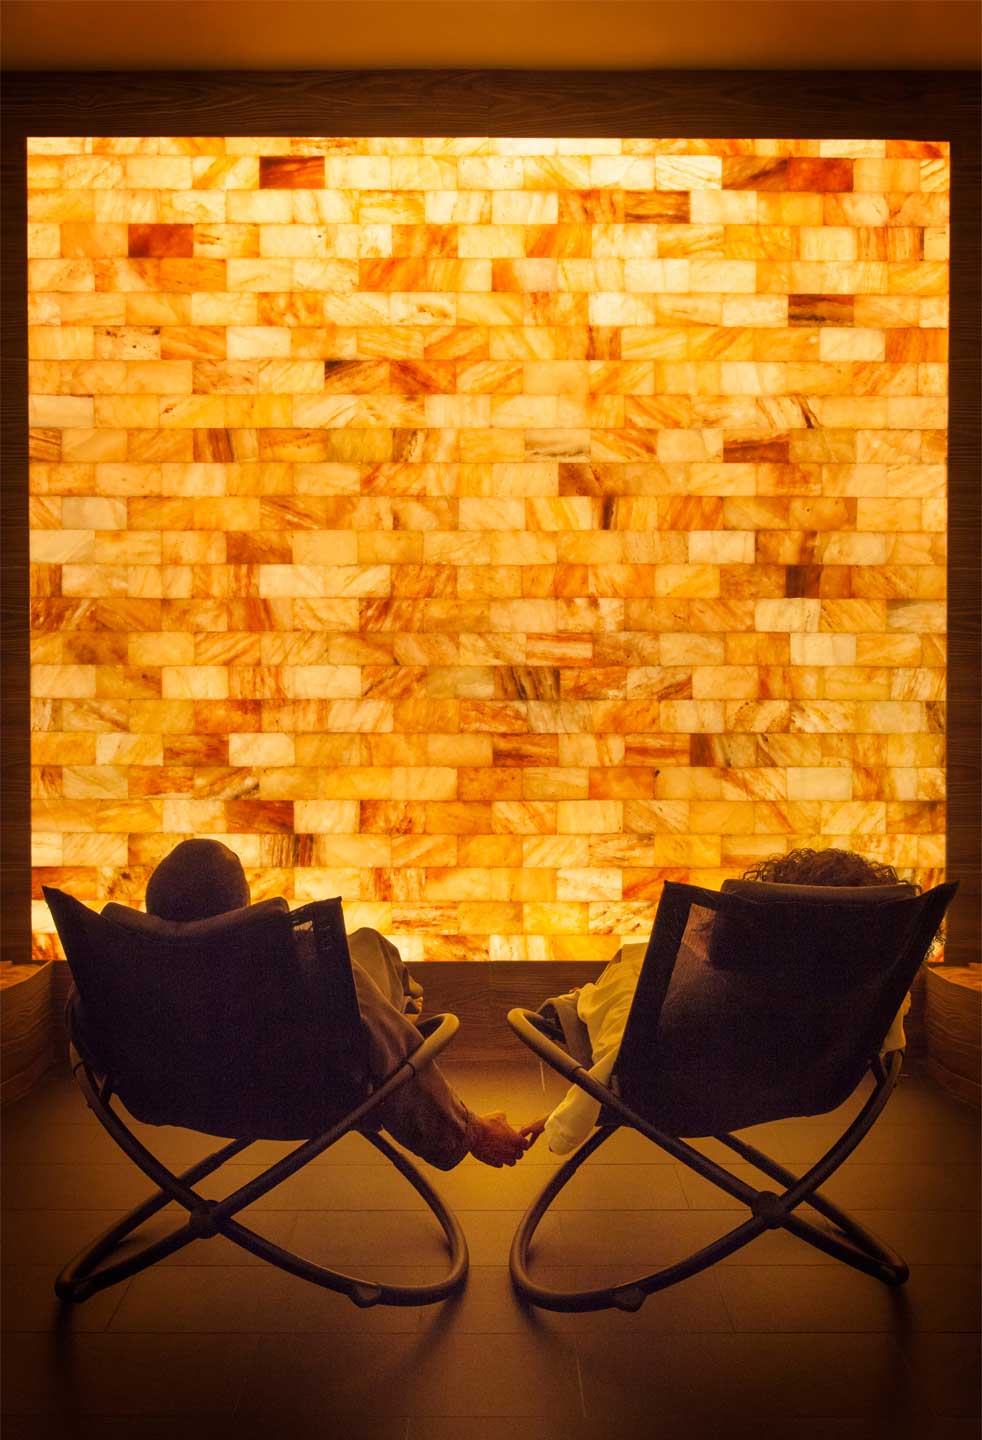 Two people relaxing in lounge chairs in a dimmed room facing a LED backlit salt panel wall at The LINQ Hotel and Casino - Las Vegas, Nevada.